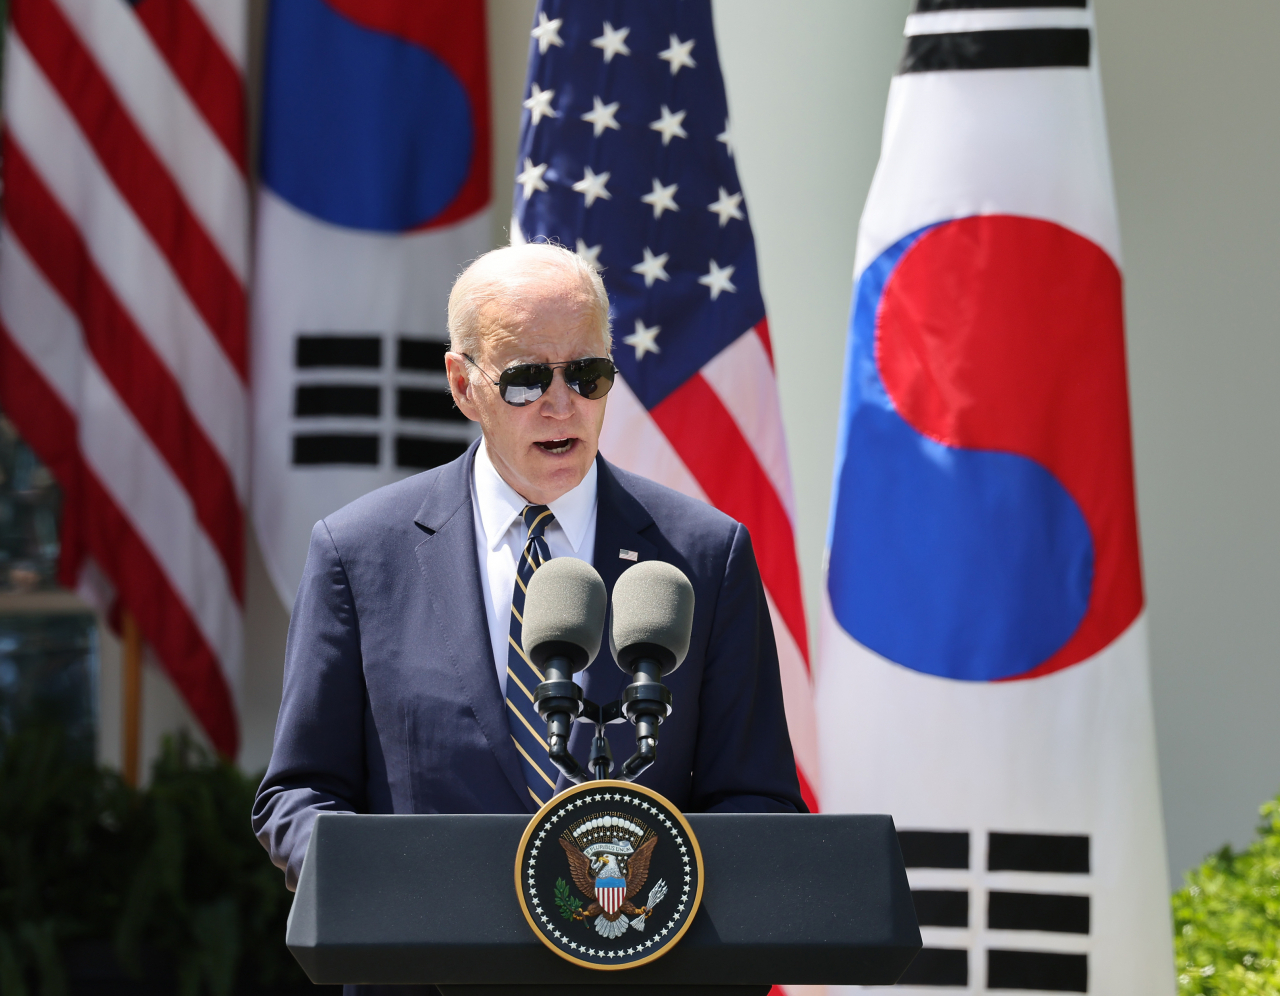 US President Joe Biden speaks at a joint news conference after their summit at the White House in Washington, D.C., Wednesday. (Yonhap)